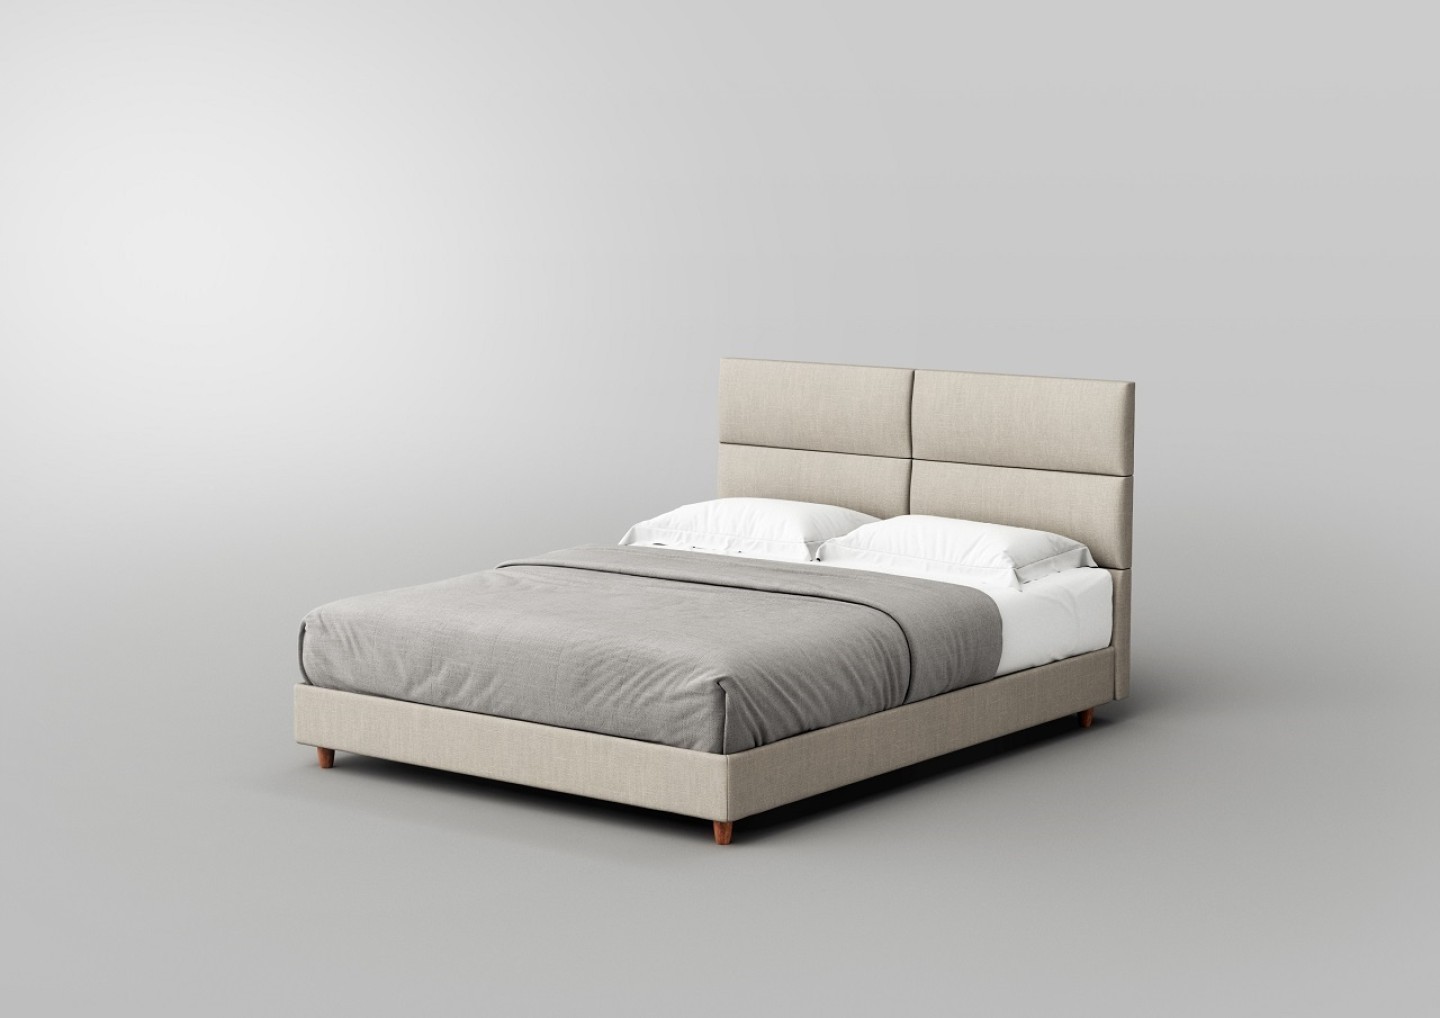 THE CALM BED by Elite Strom